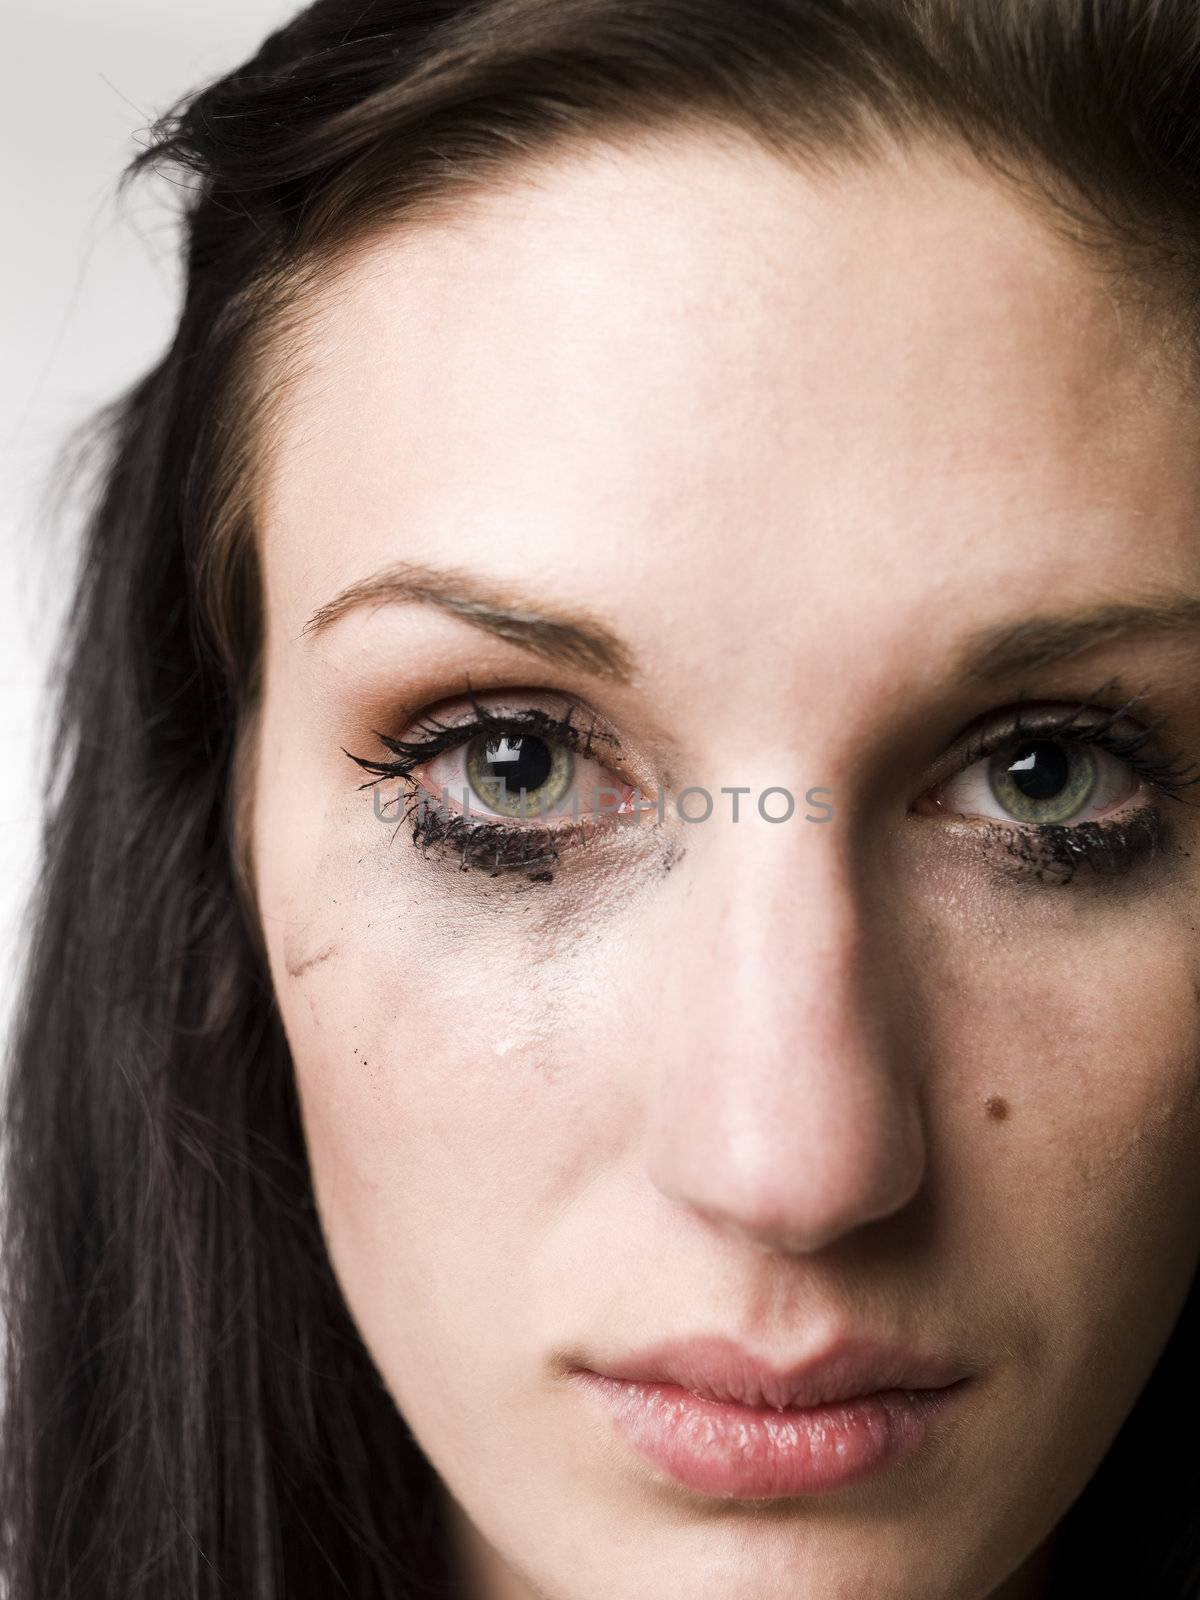 Close-up of a crying woman